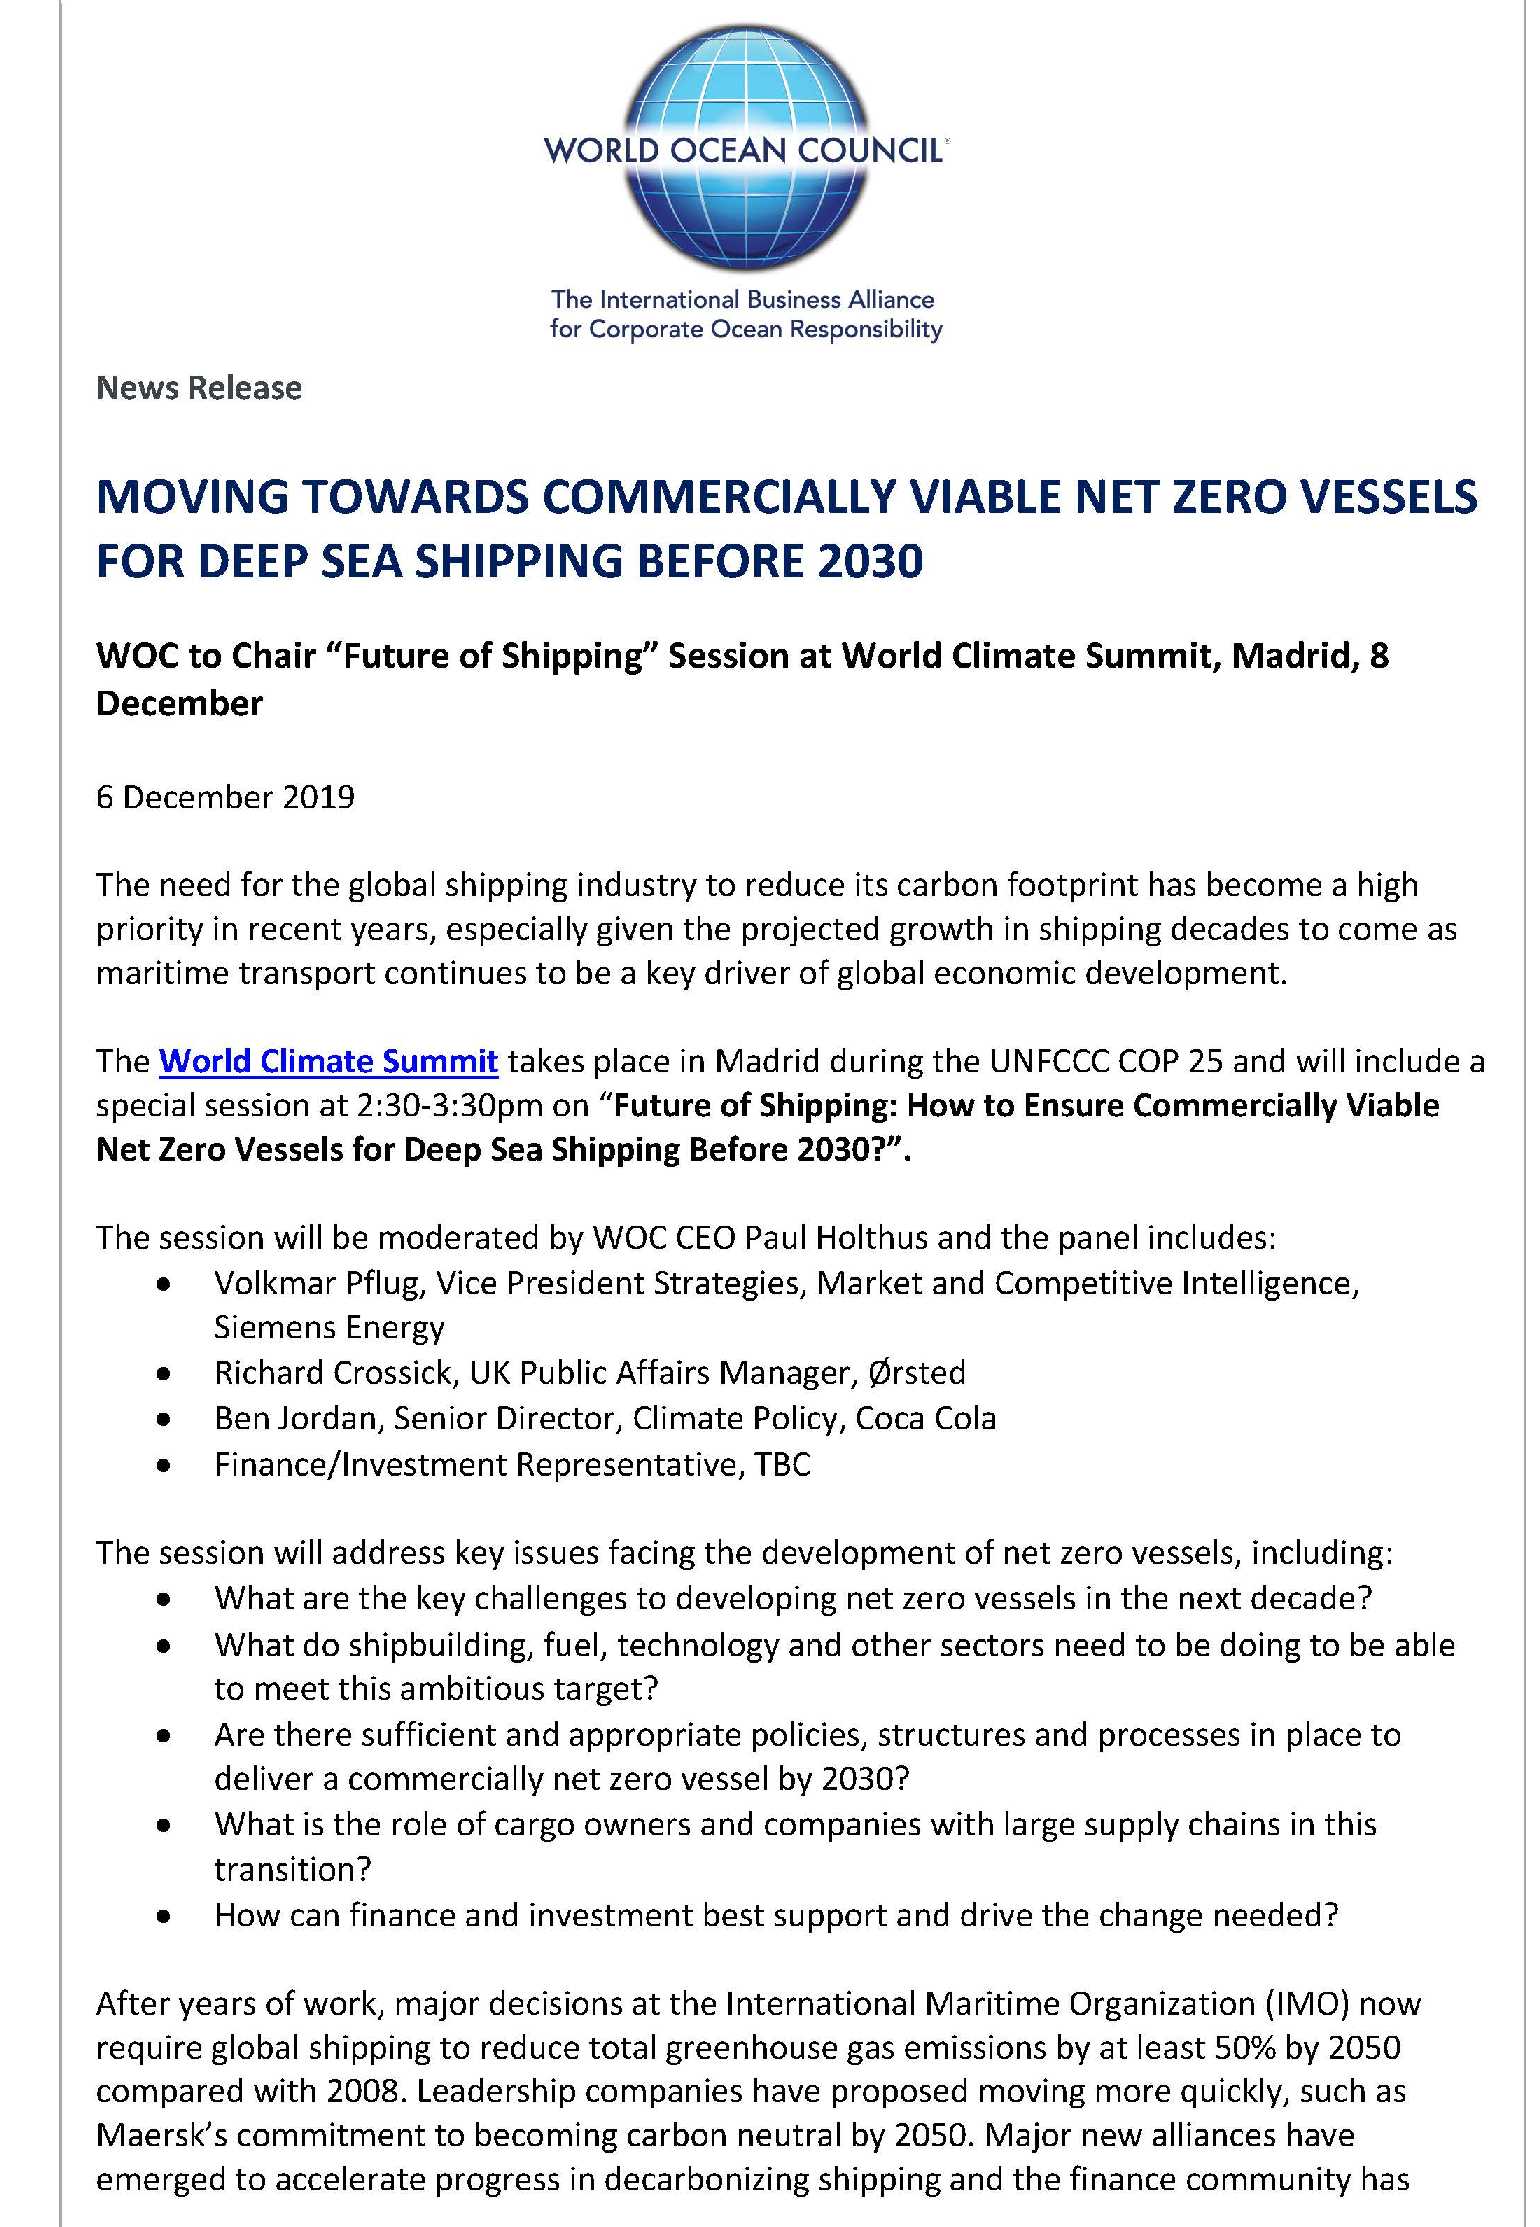 World Ocean Council moving to net zero carbon vessels before 2030